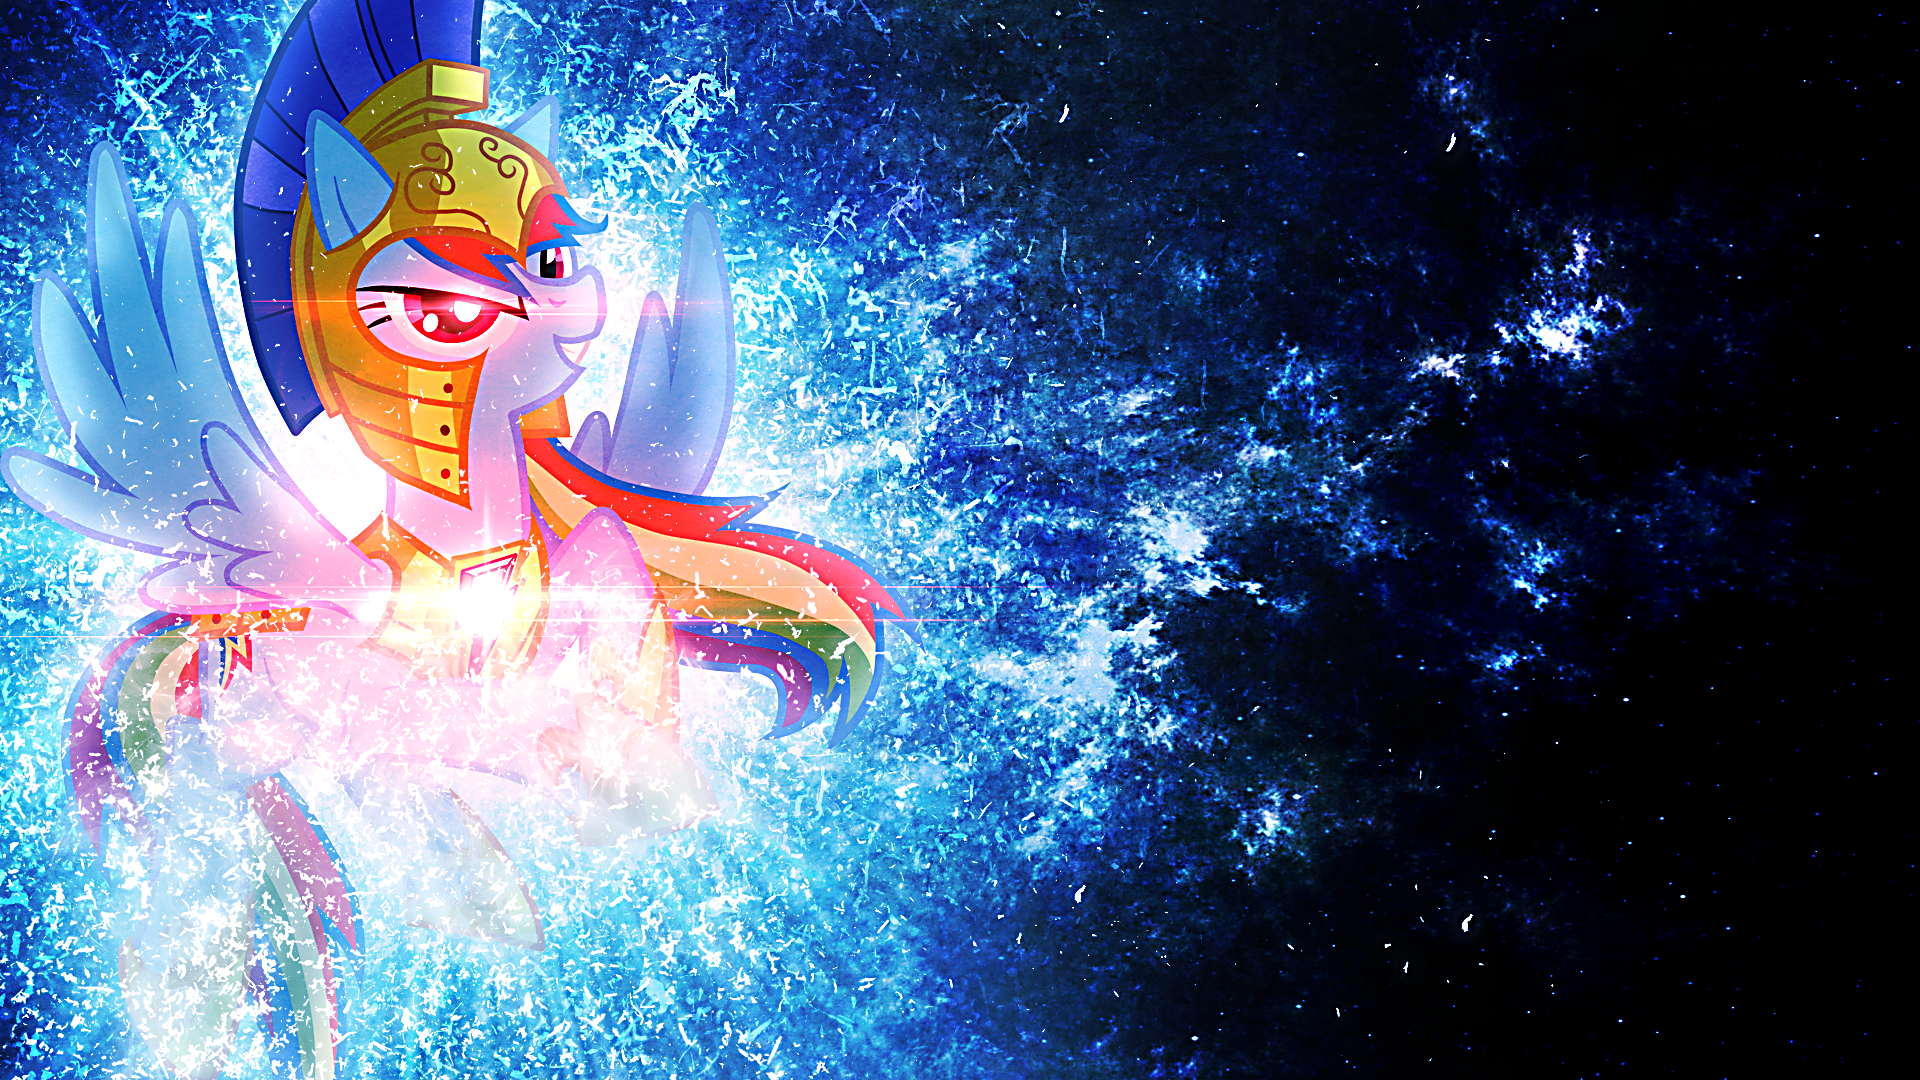 Rainbow Dash Guardian Of Loyalty - Wallpaper by Equestria-Prevails, JennieOo and Tzolkine